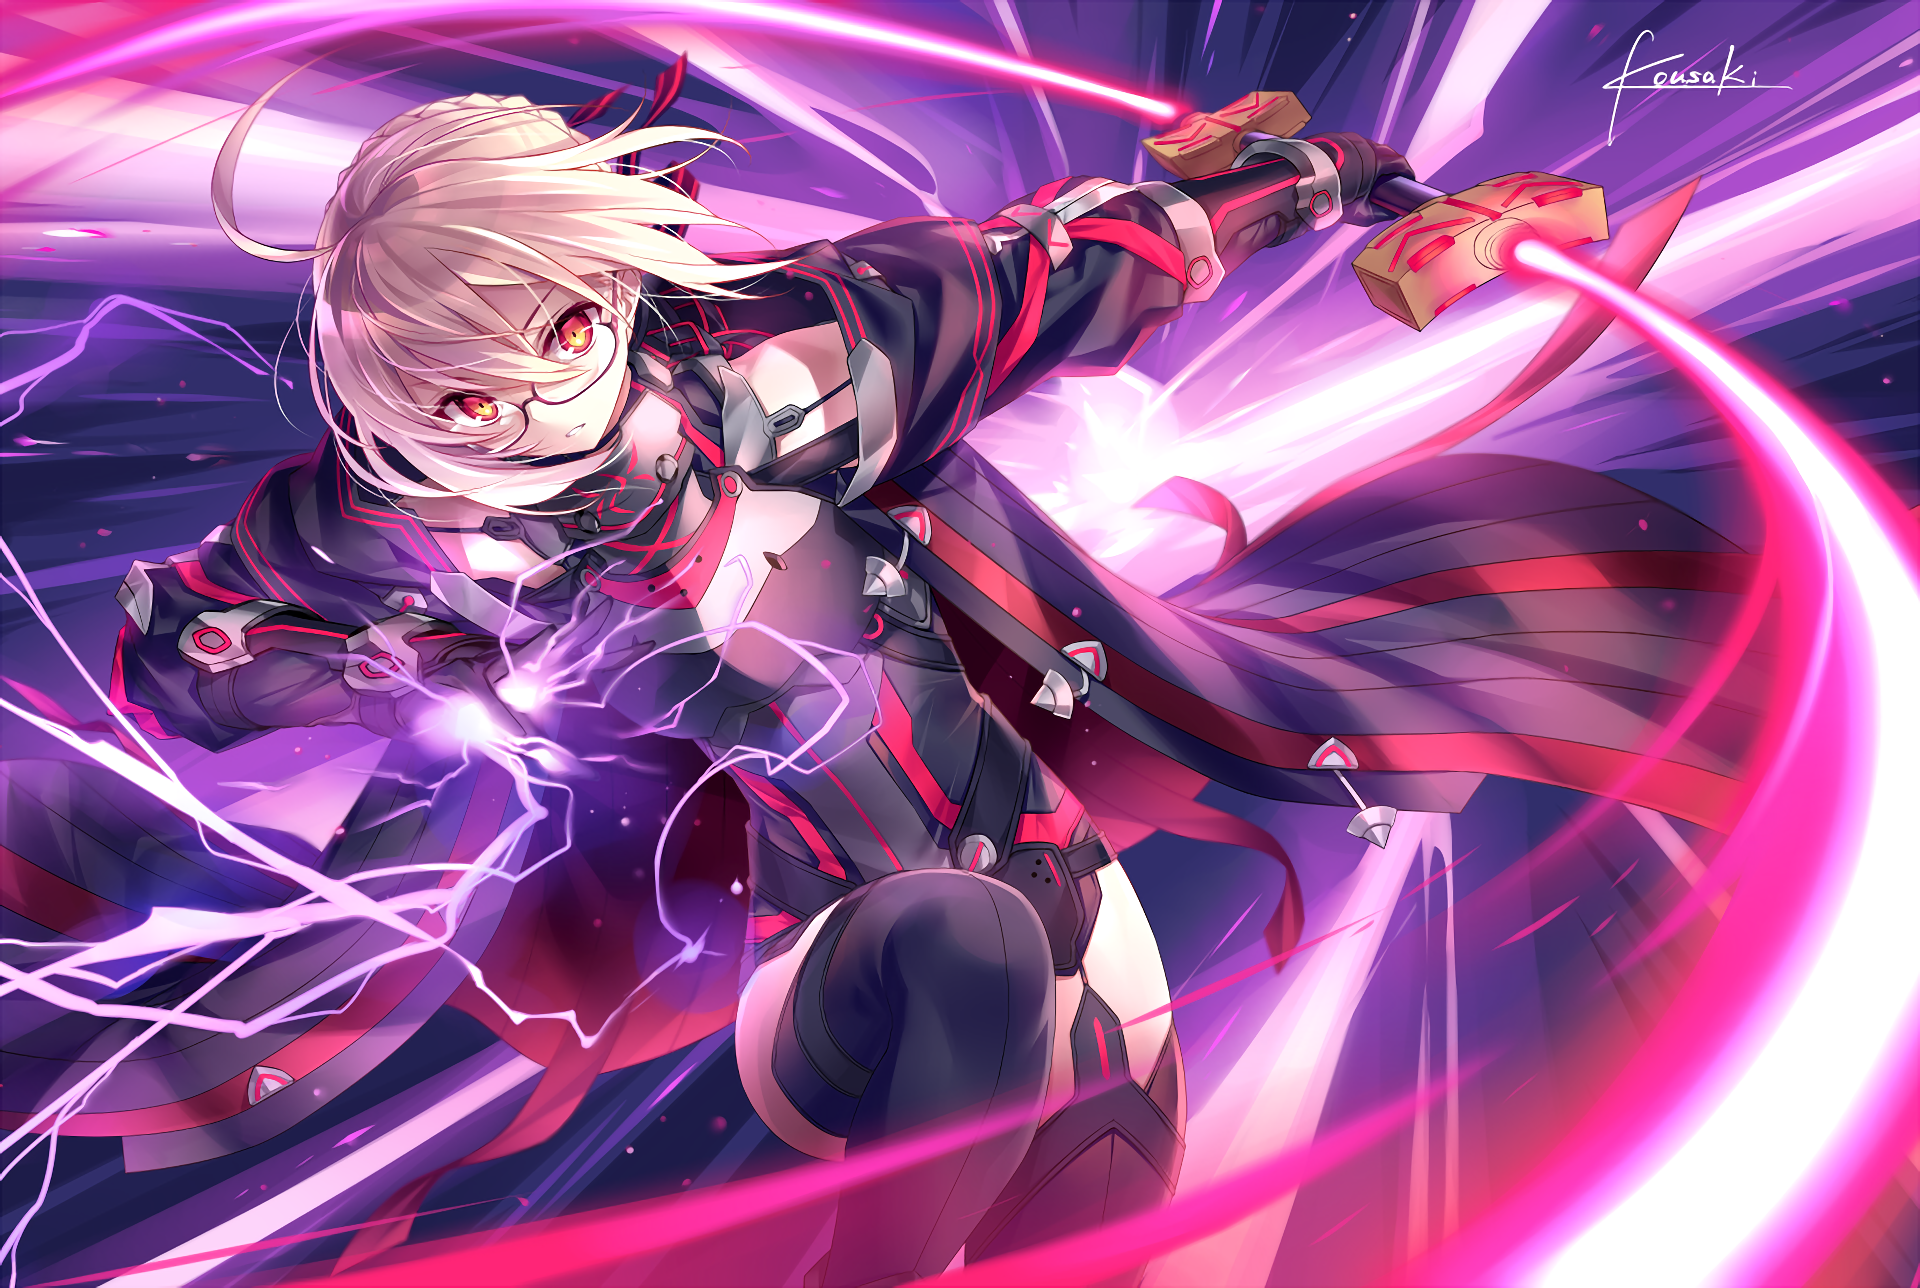 2472 Fate Grand Order Hd Wallpapers Background Images Wallpaper Abyss